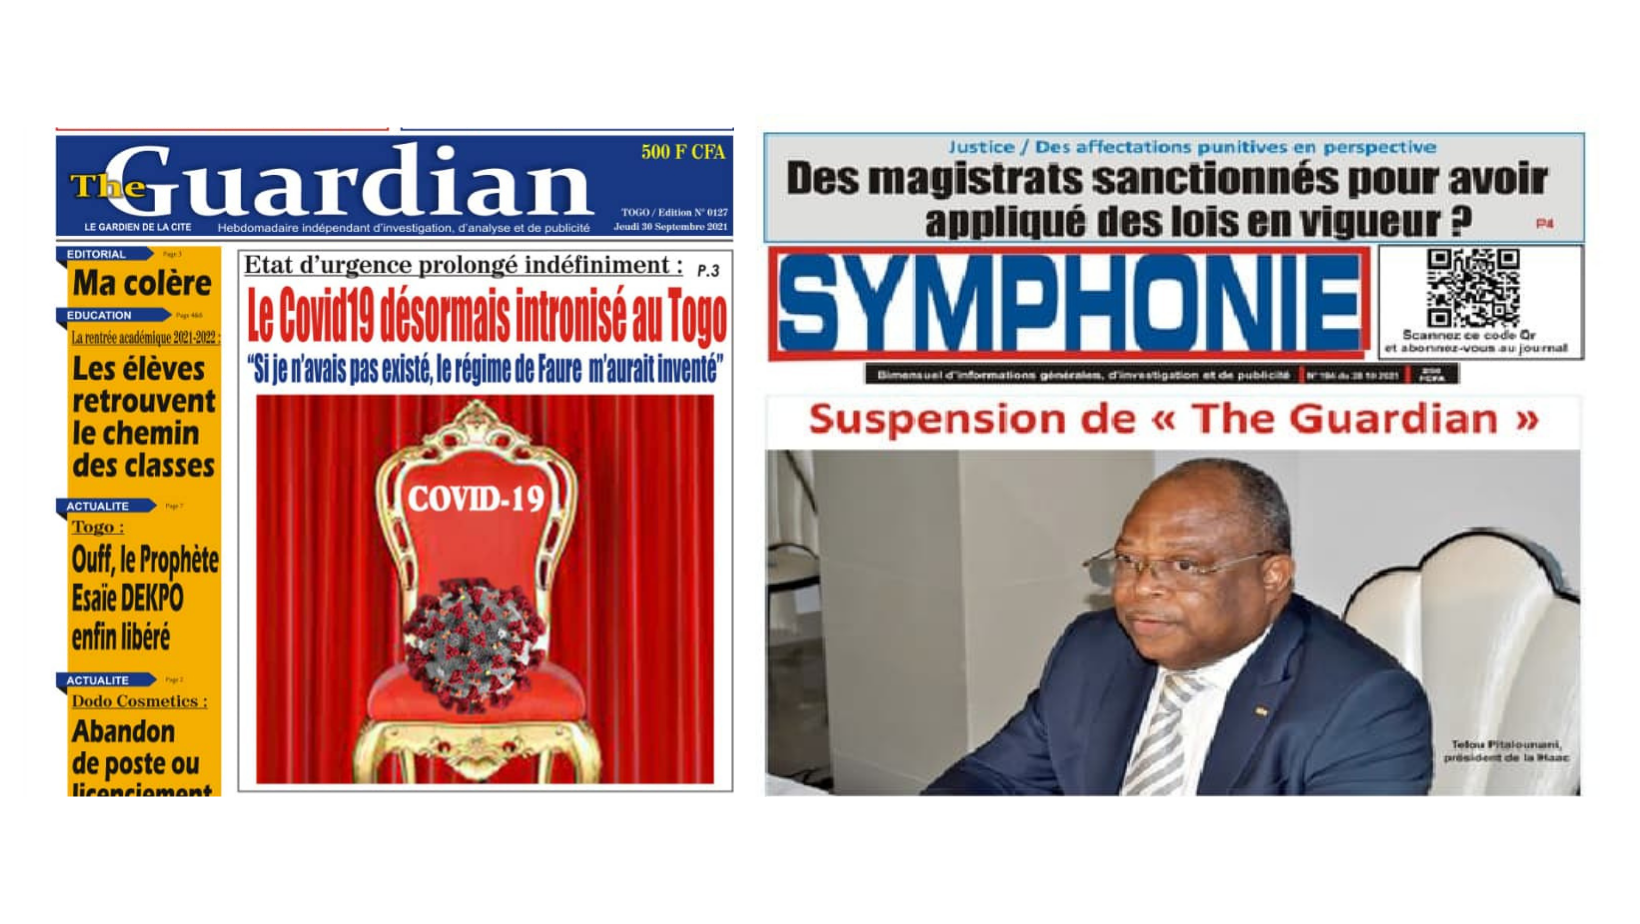 “Disproportionate and arbitrary” suspensions of two newspapers in Togo